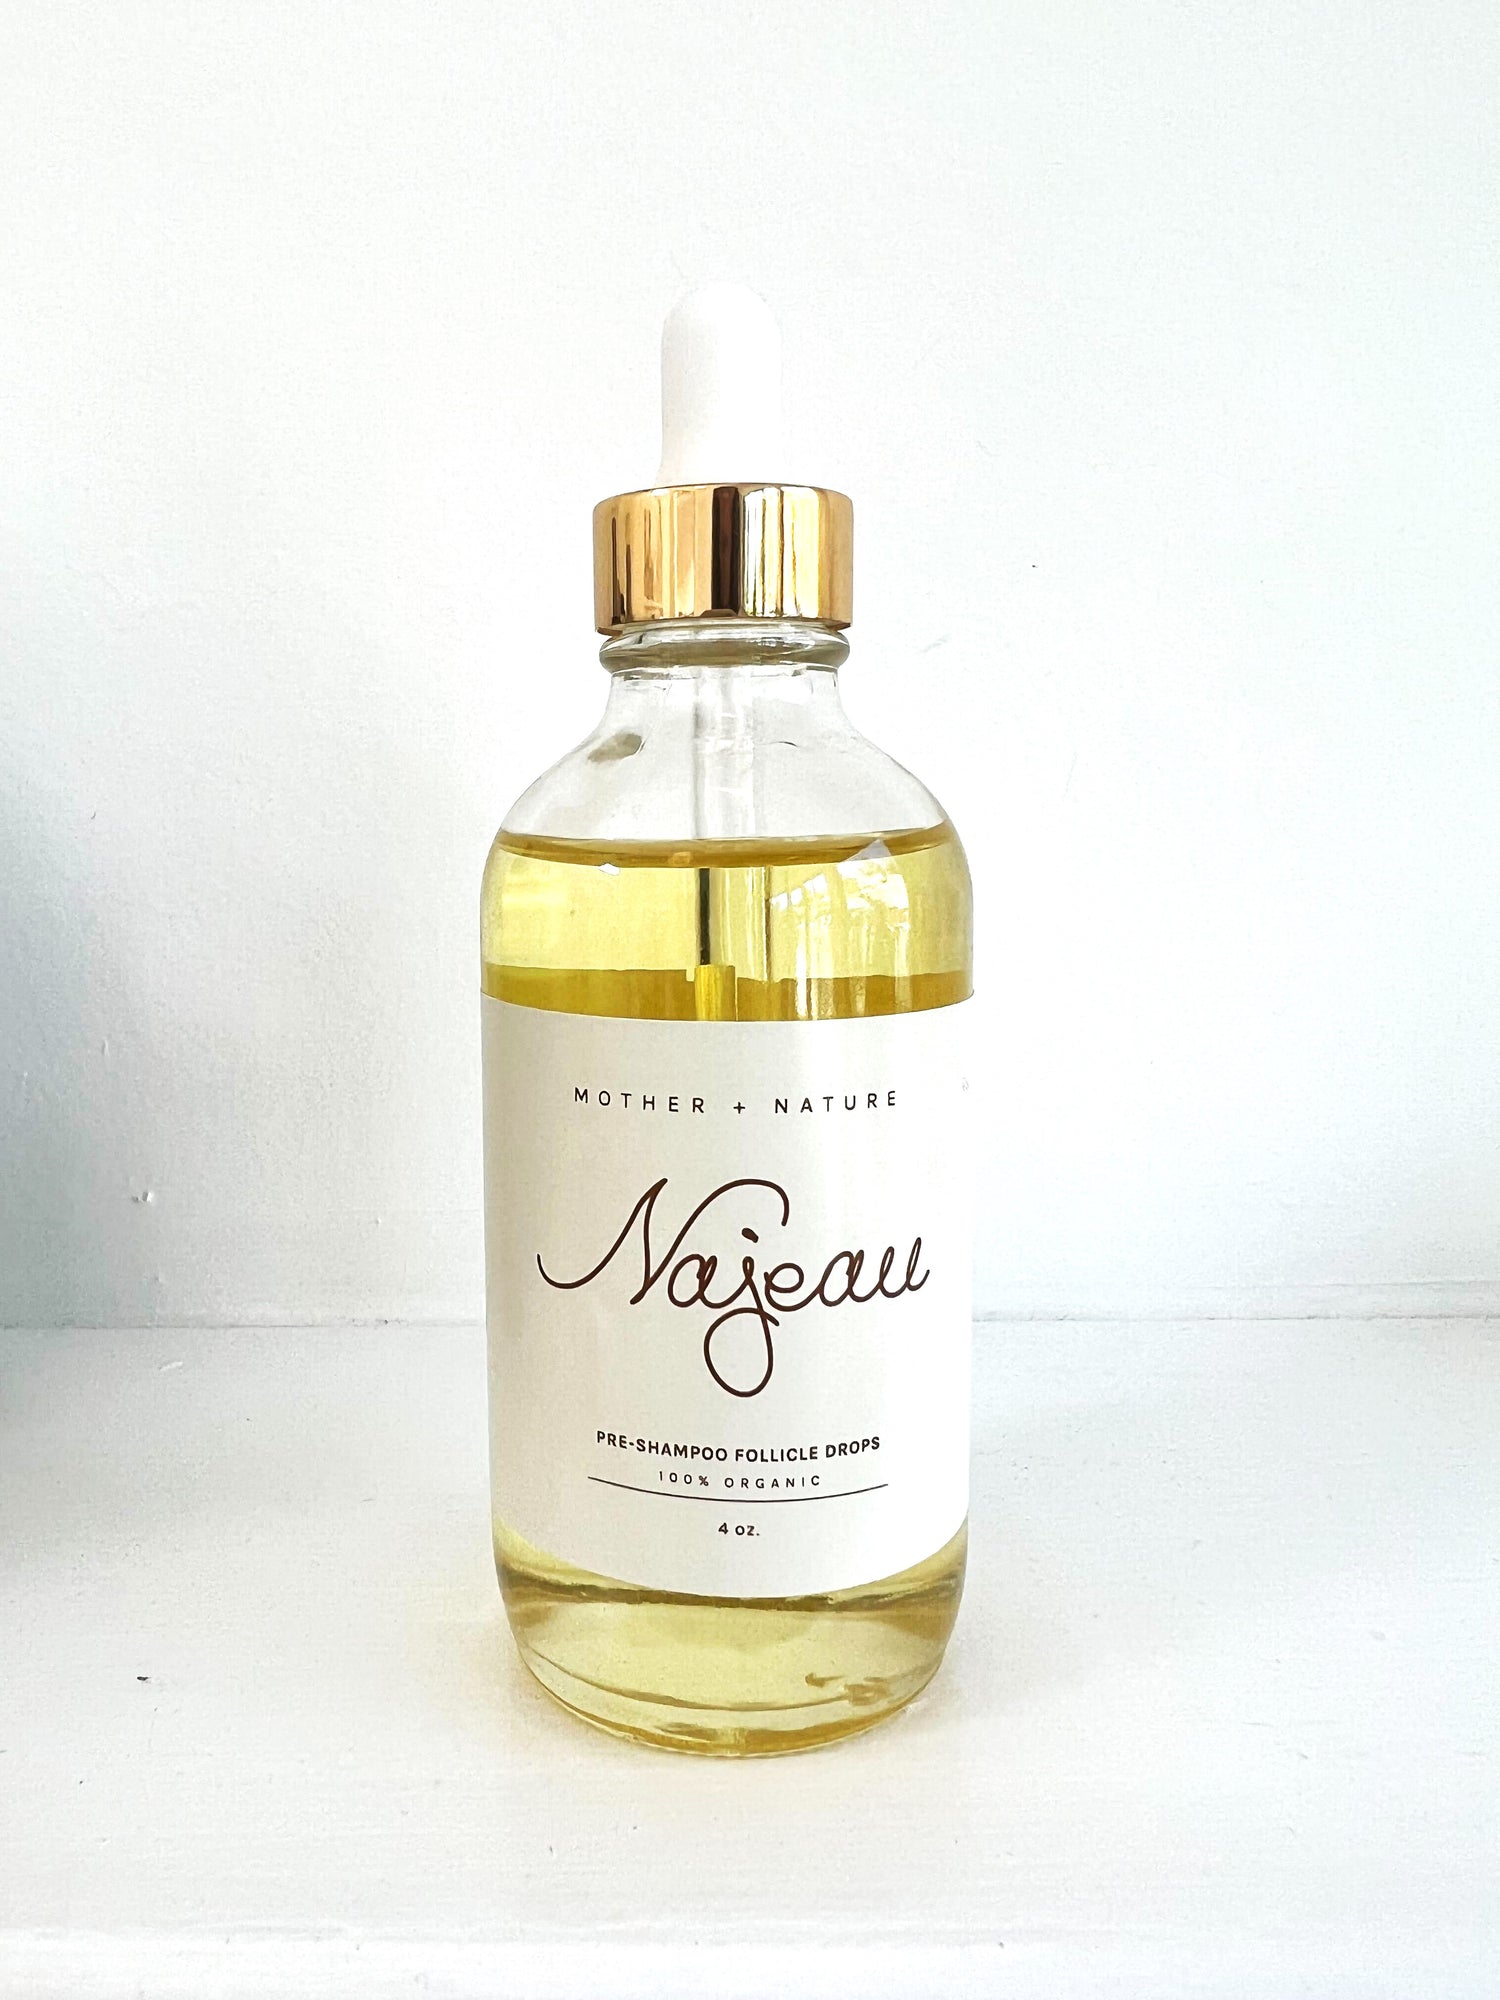 Najeau Follicle Drops in a glass container with a dropper on top, and golden liquid inside.